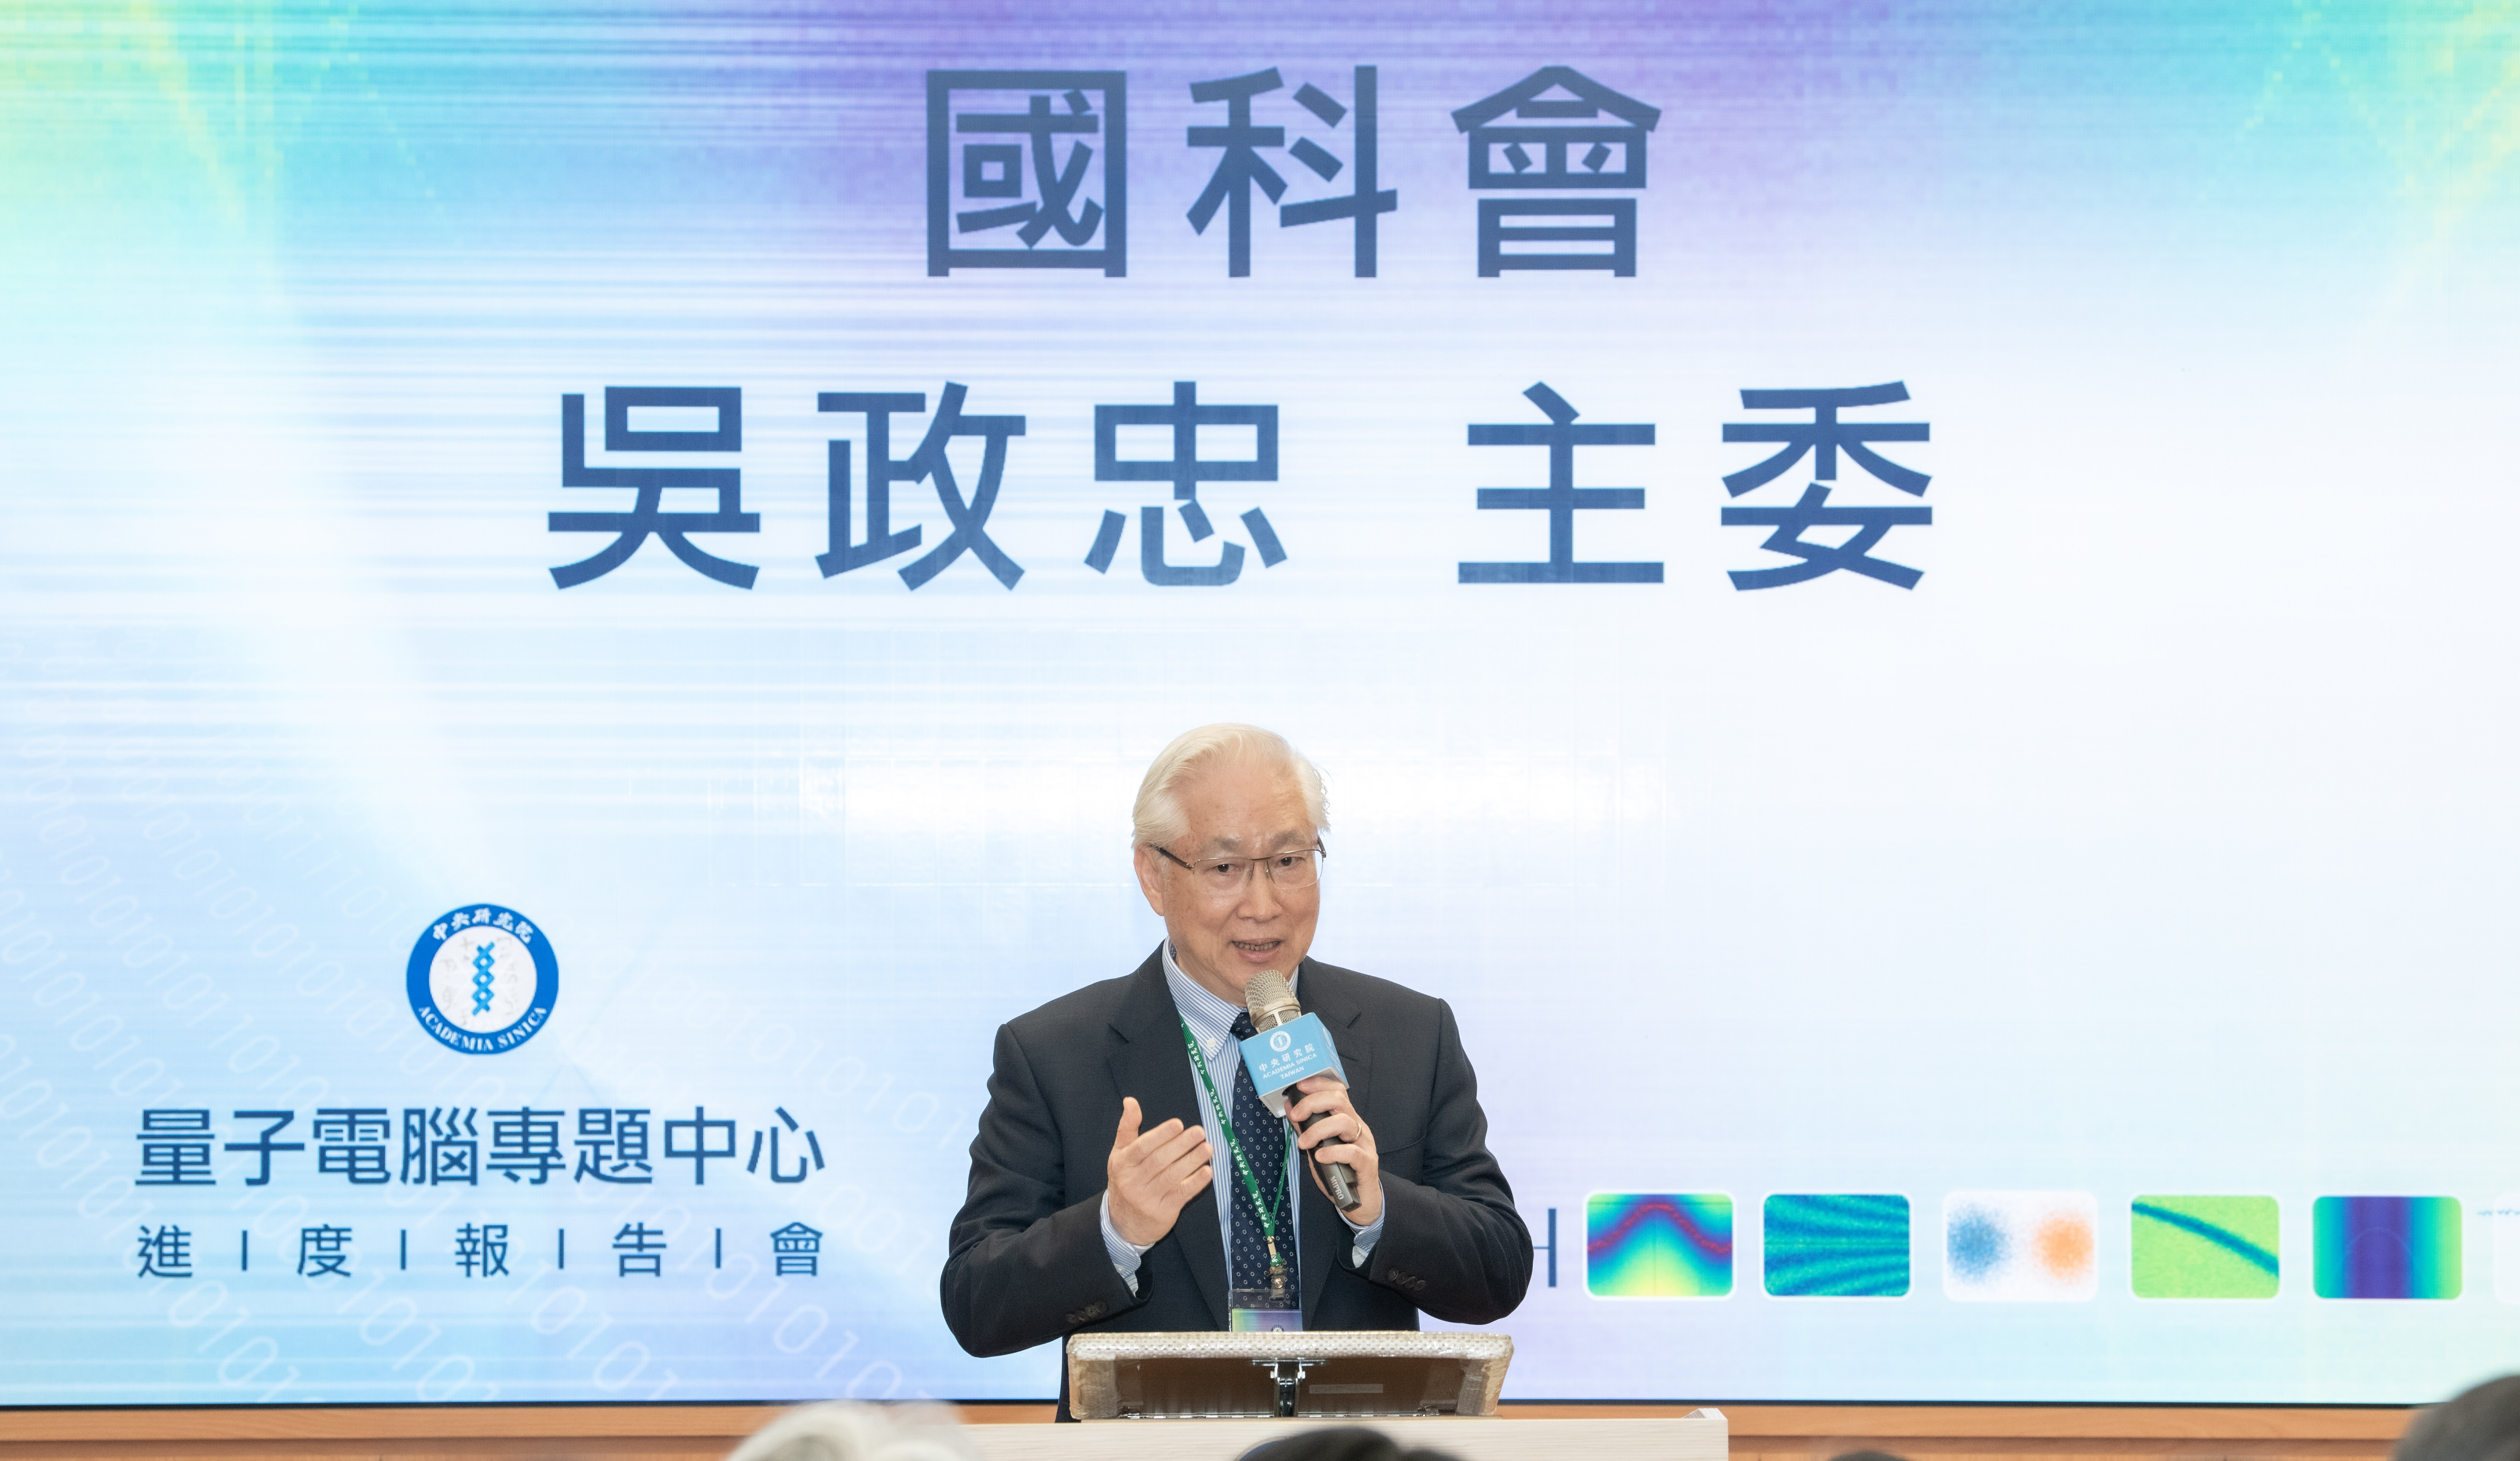 Chairman of the National Science and Technology Council Tsung-Tsong Wu